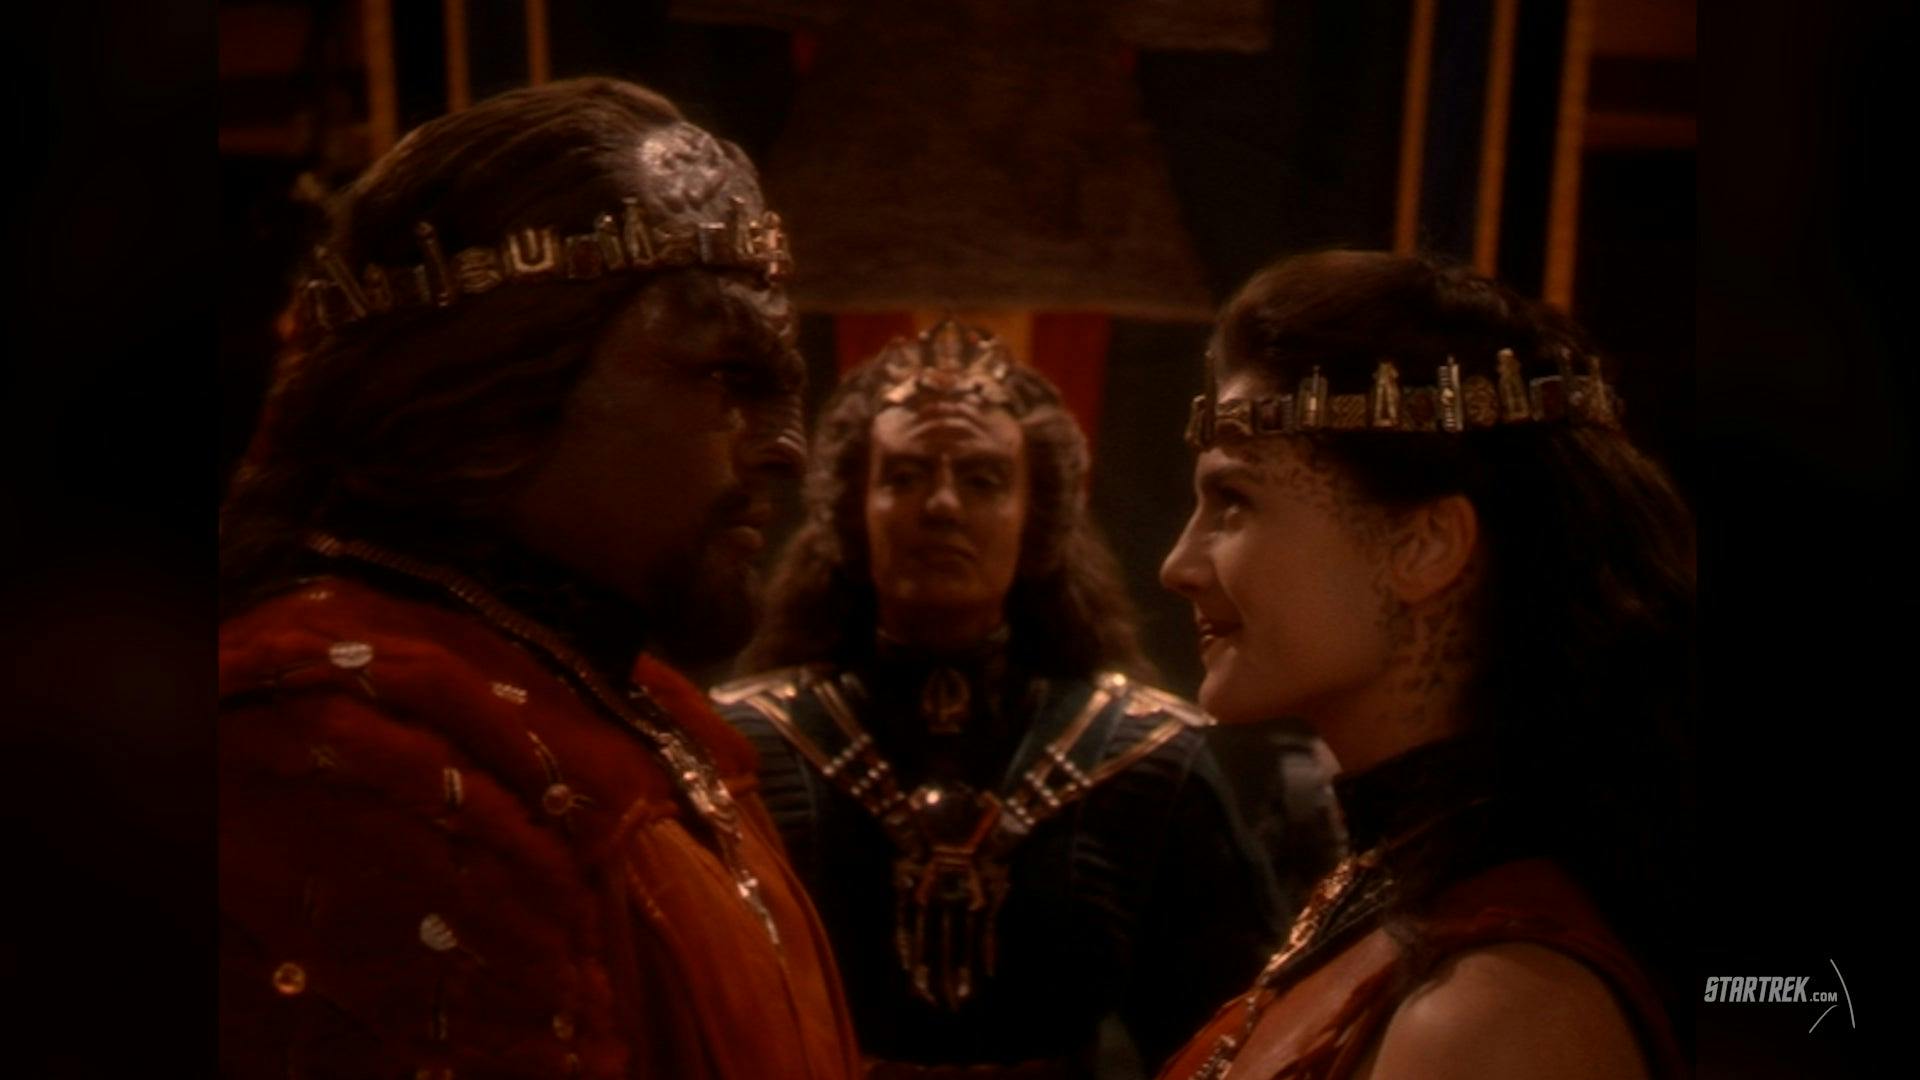 Worf and Jadzia Dax stand, ready to be married, in this still from Star Trek: Deep Space Nine (